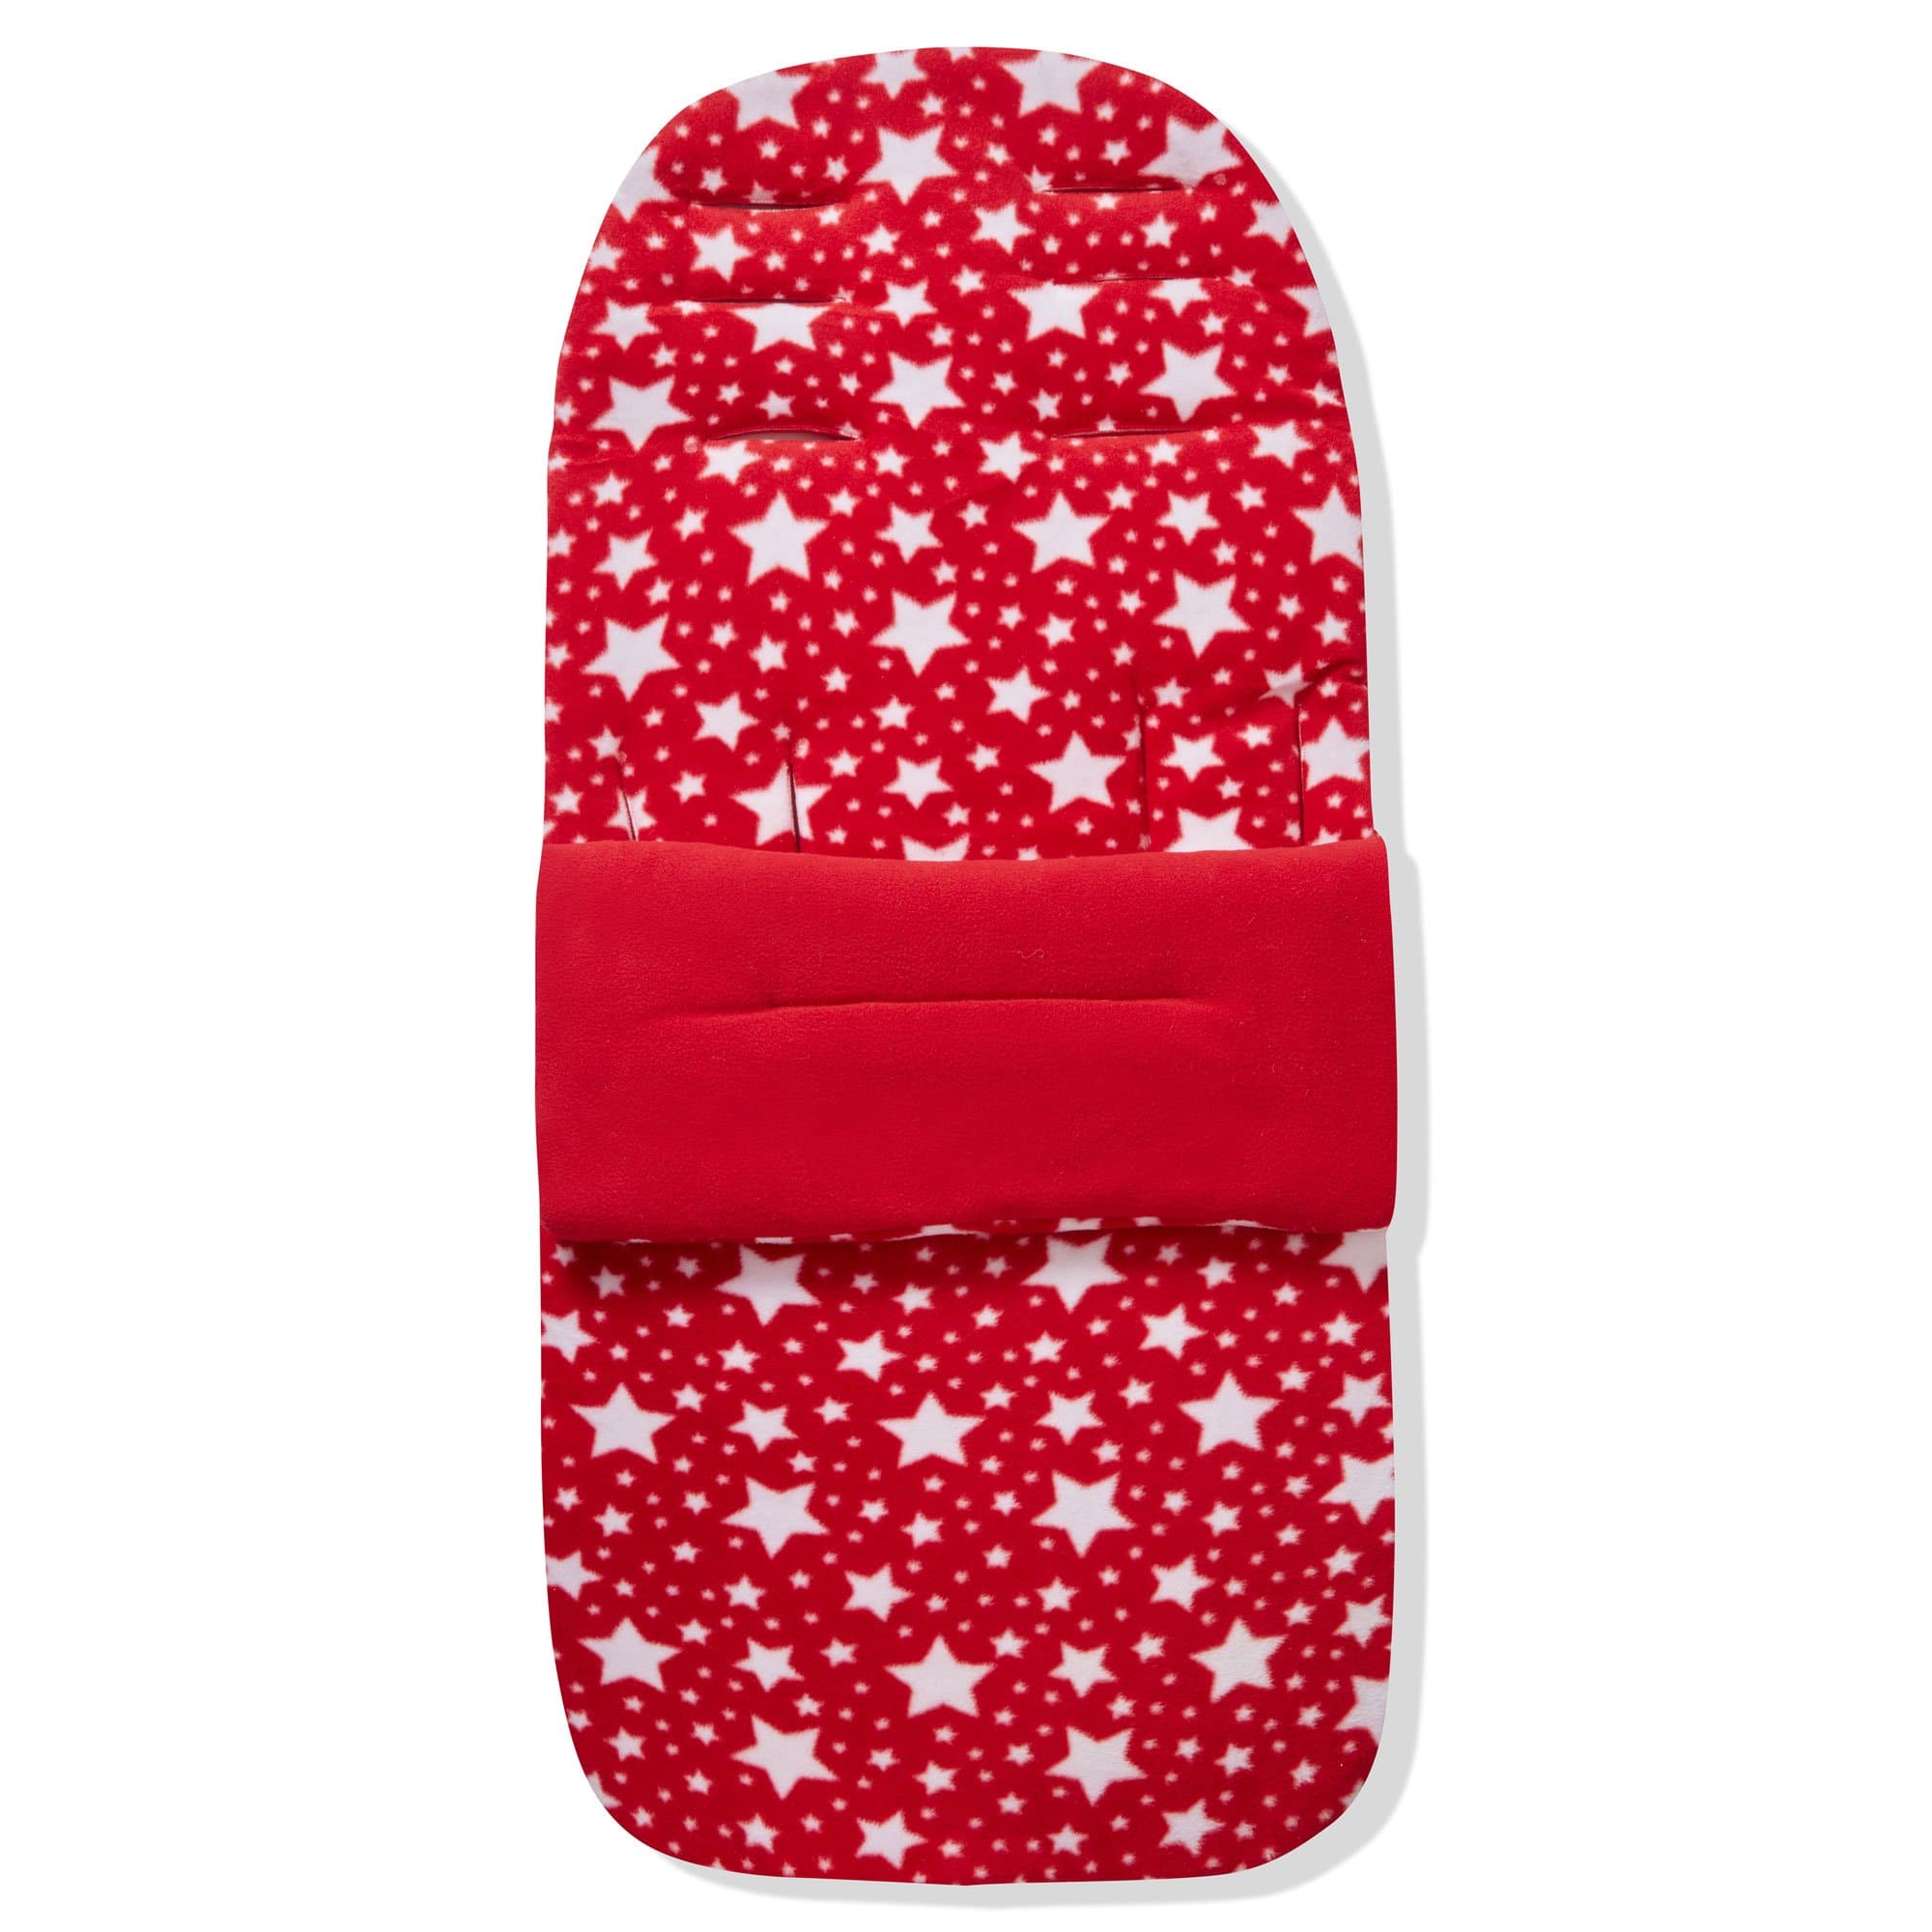 Fleece Footmuff / Cosy Toes Compatible with Mothercare - Red Star / Fits All Models | For Your Little One